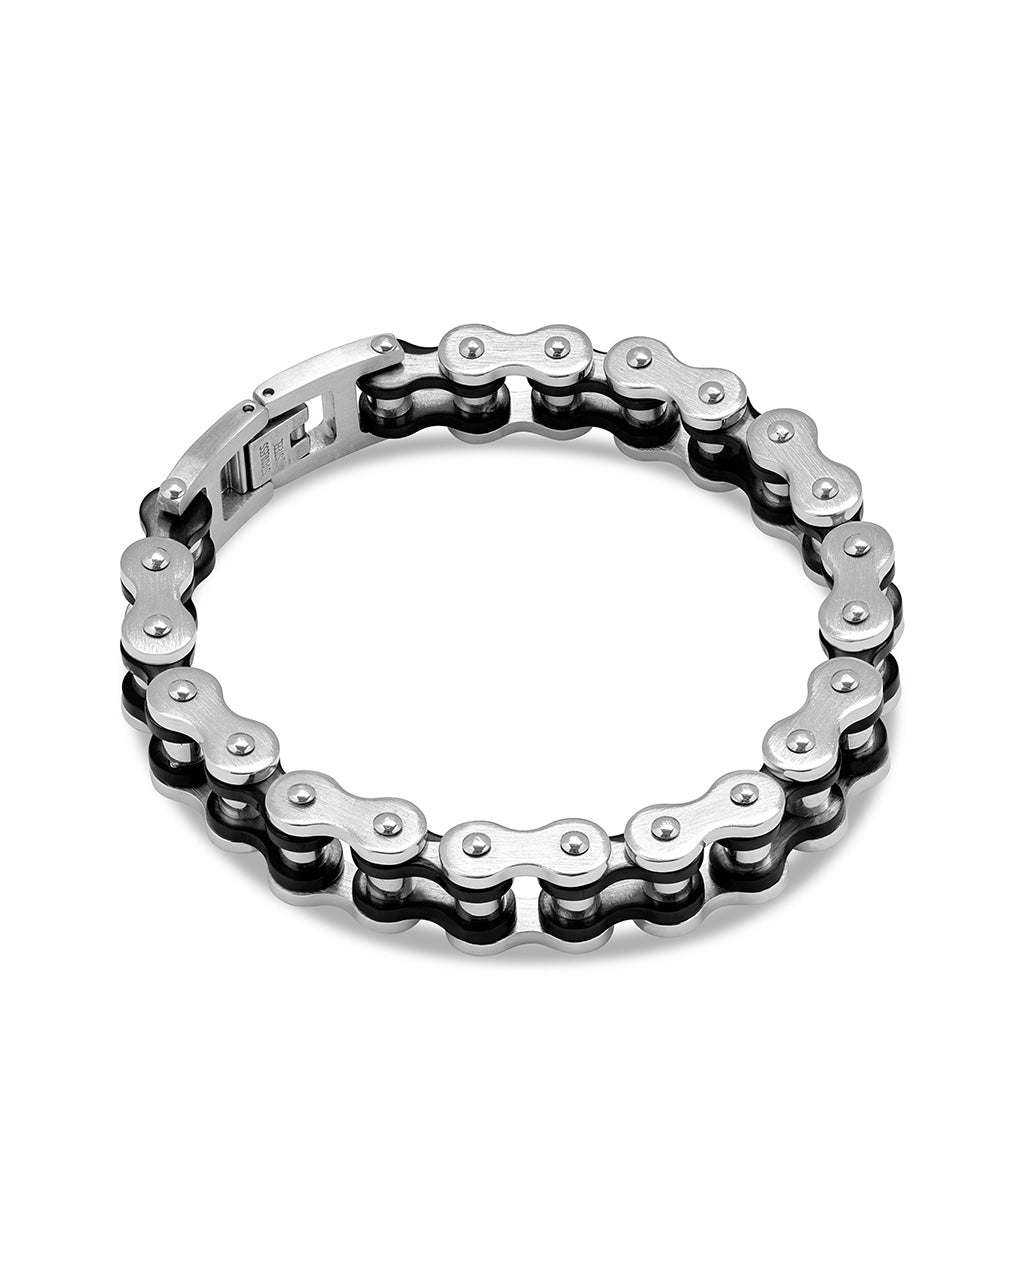 925 Sterling Silver Motorcycle Chain Bracelet Bicycle Chain 